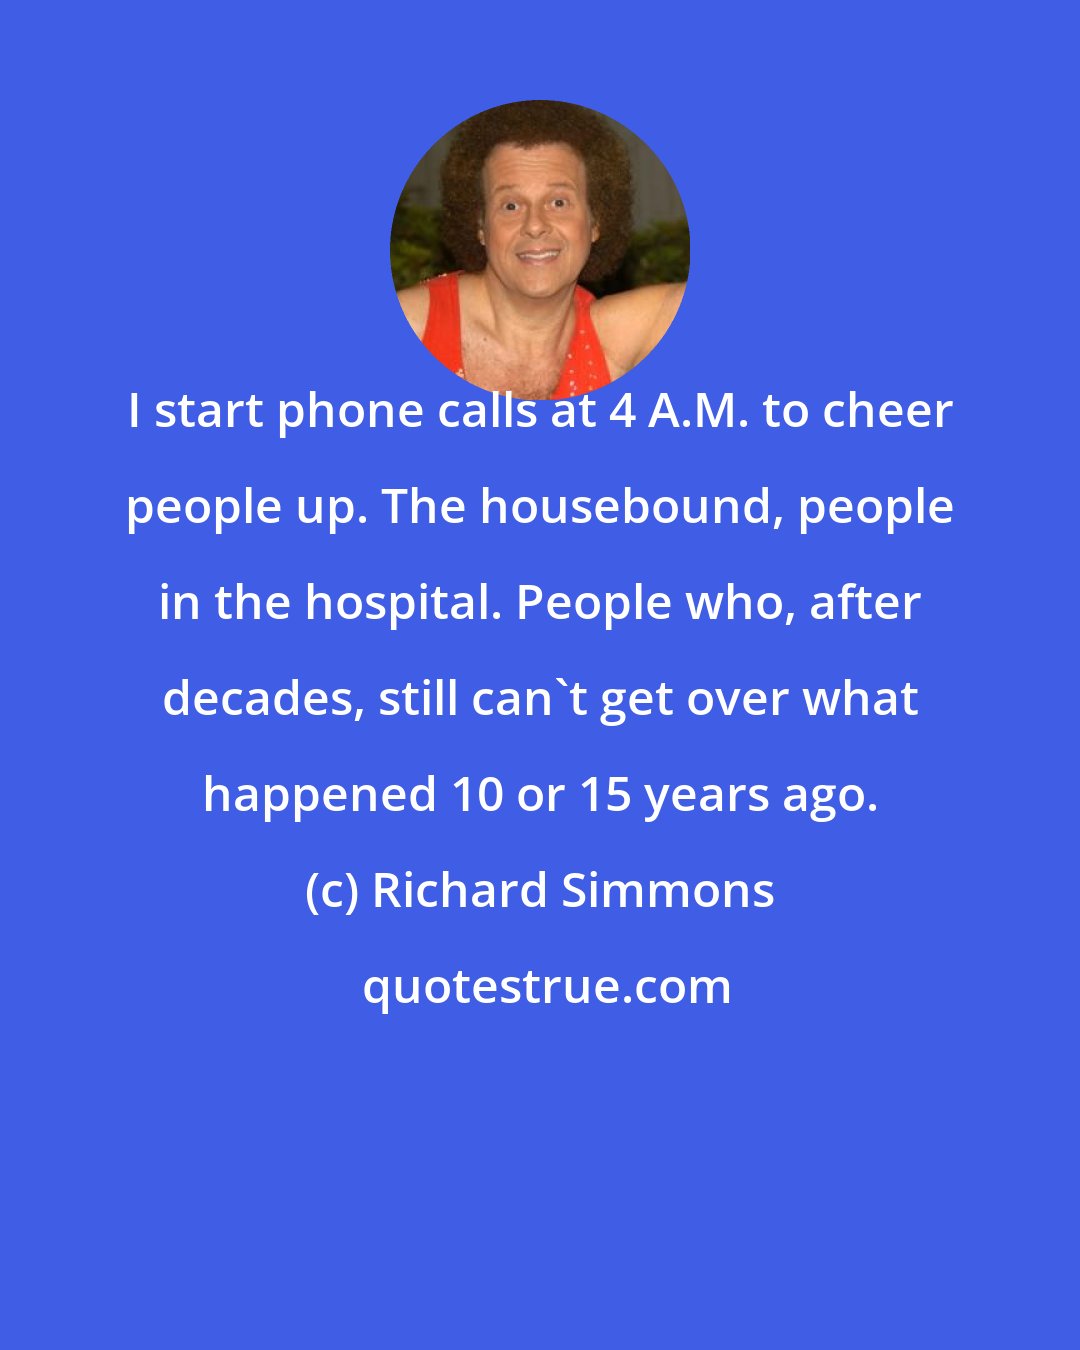 Richard Simmons: I start phone calls at 4 A.M. to cheer people up. The housebound, people in the hospital. People who, after decades, still can't get over what happened 10 or 15 years ago.